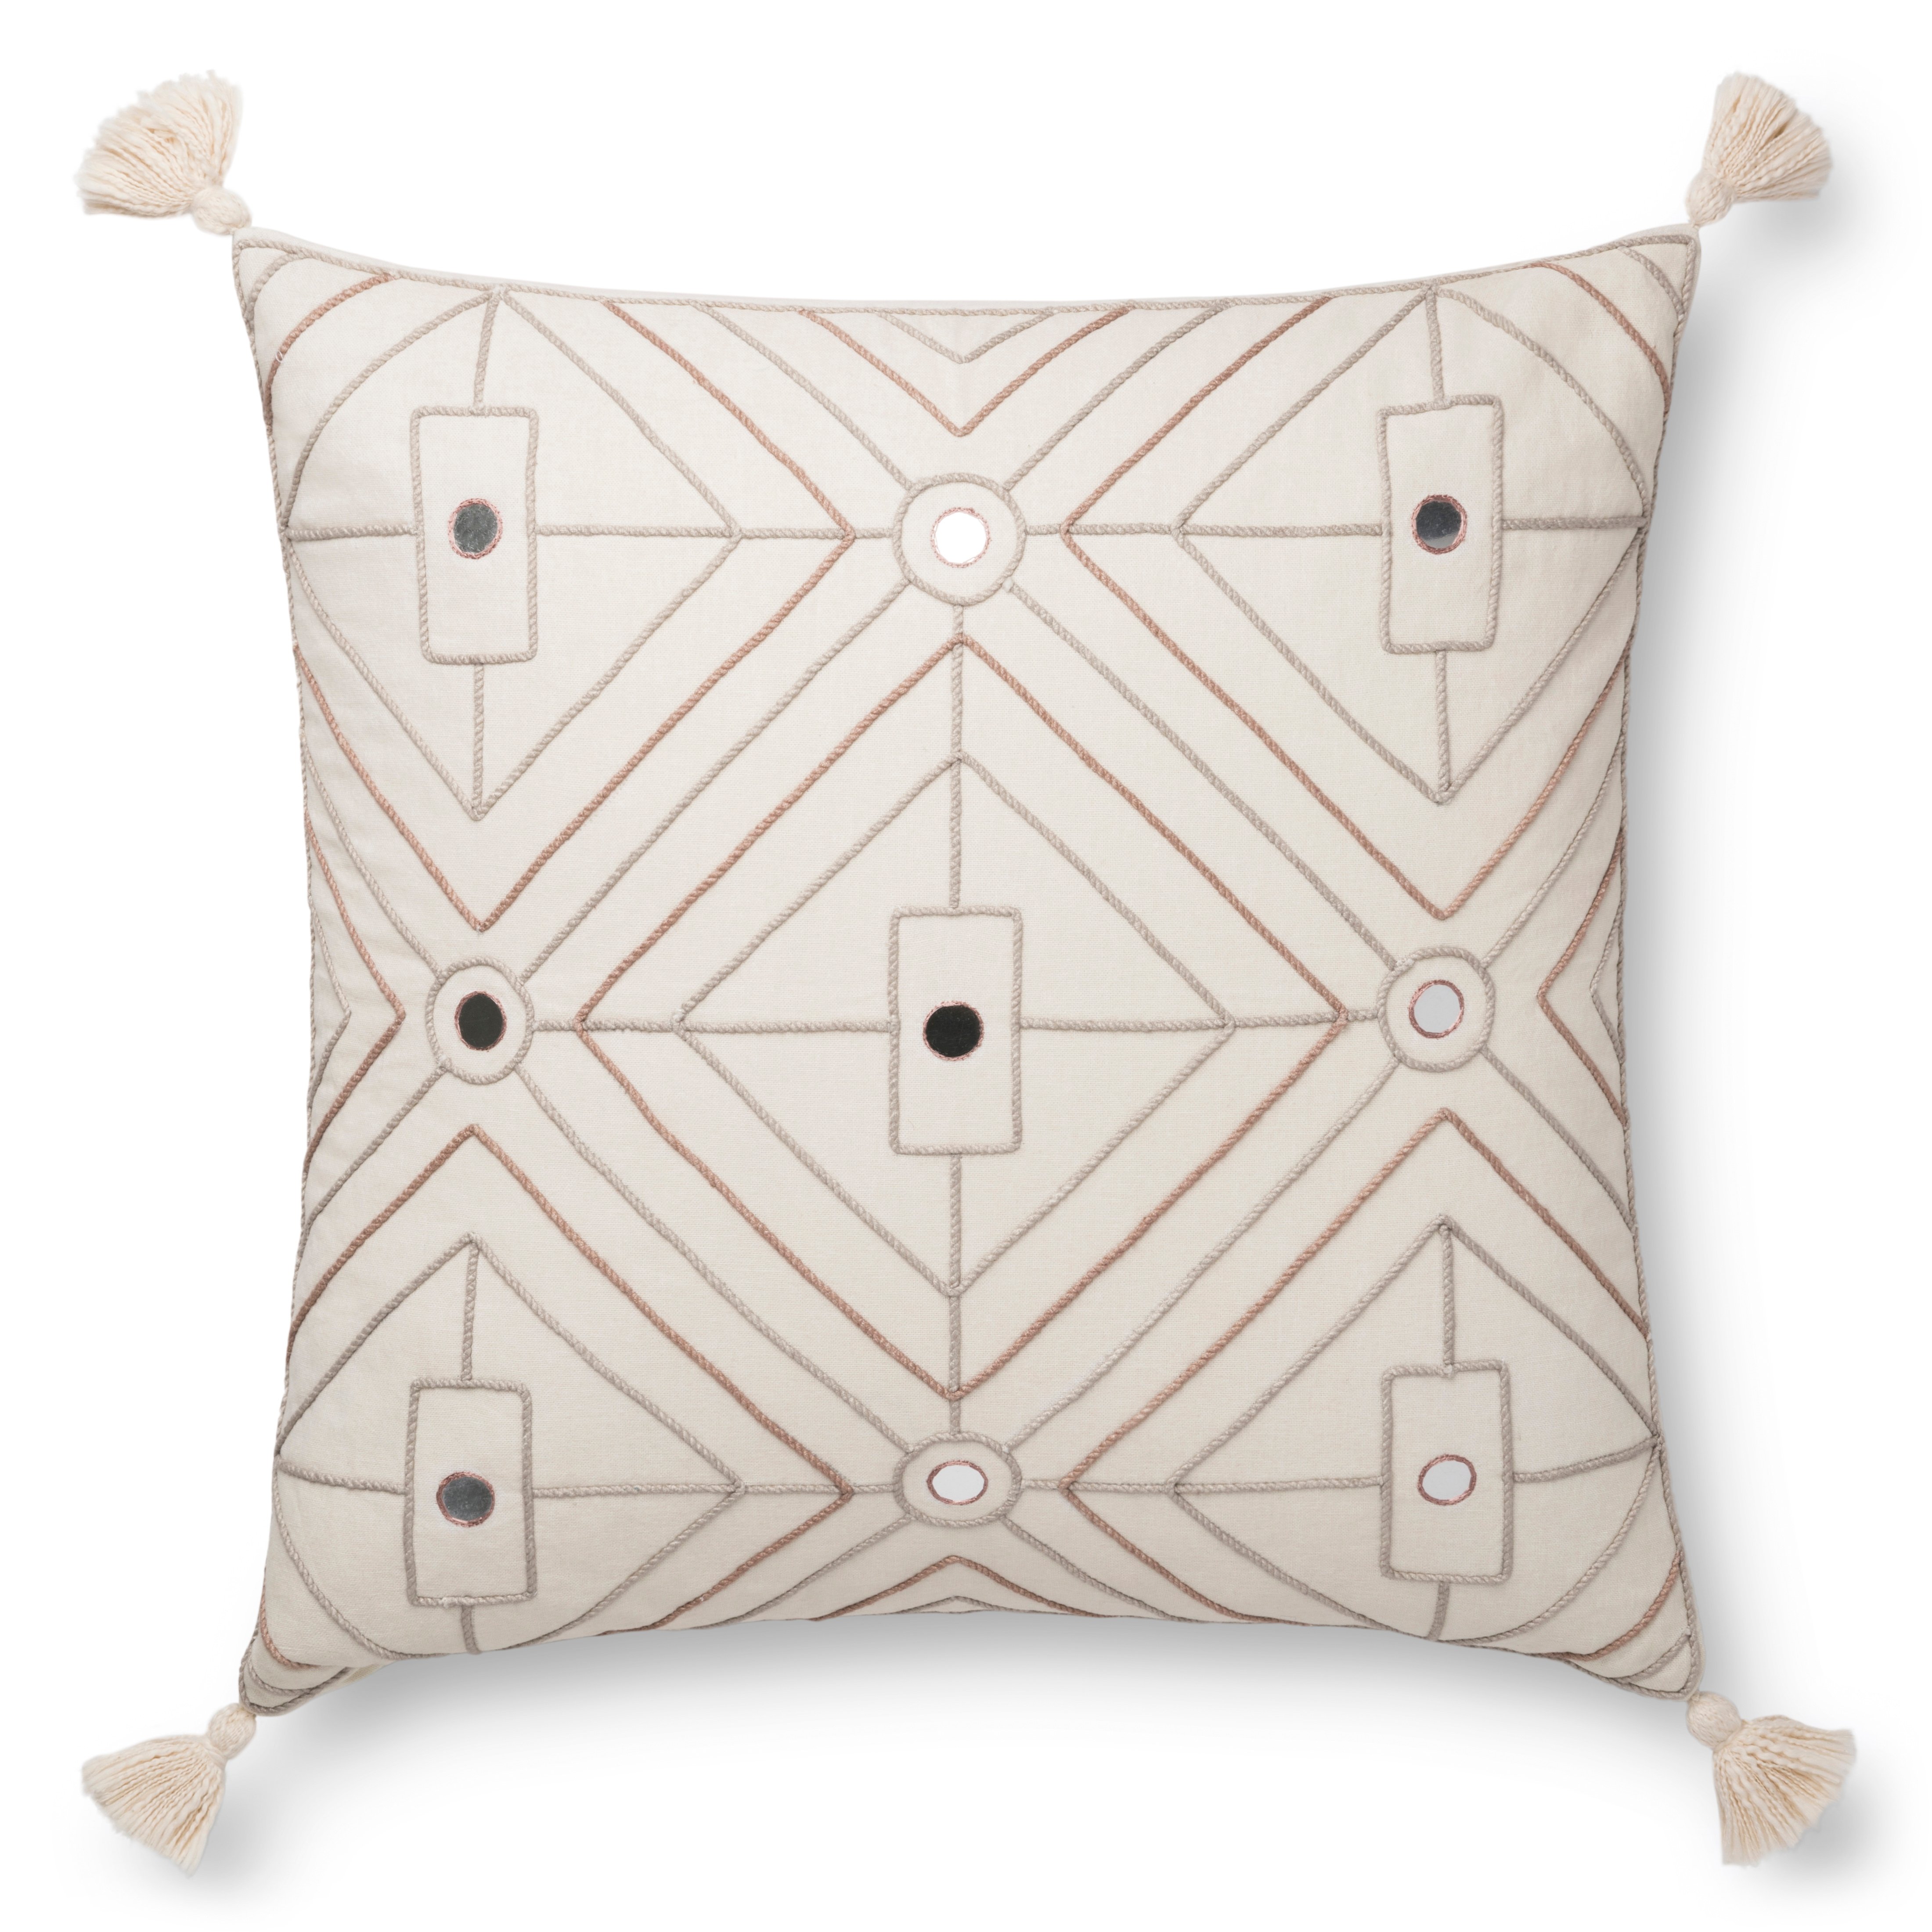 Justina Blakeney x Loloi Pillows P0773 Natural 22" x 22" Cover Only - Image 0